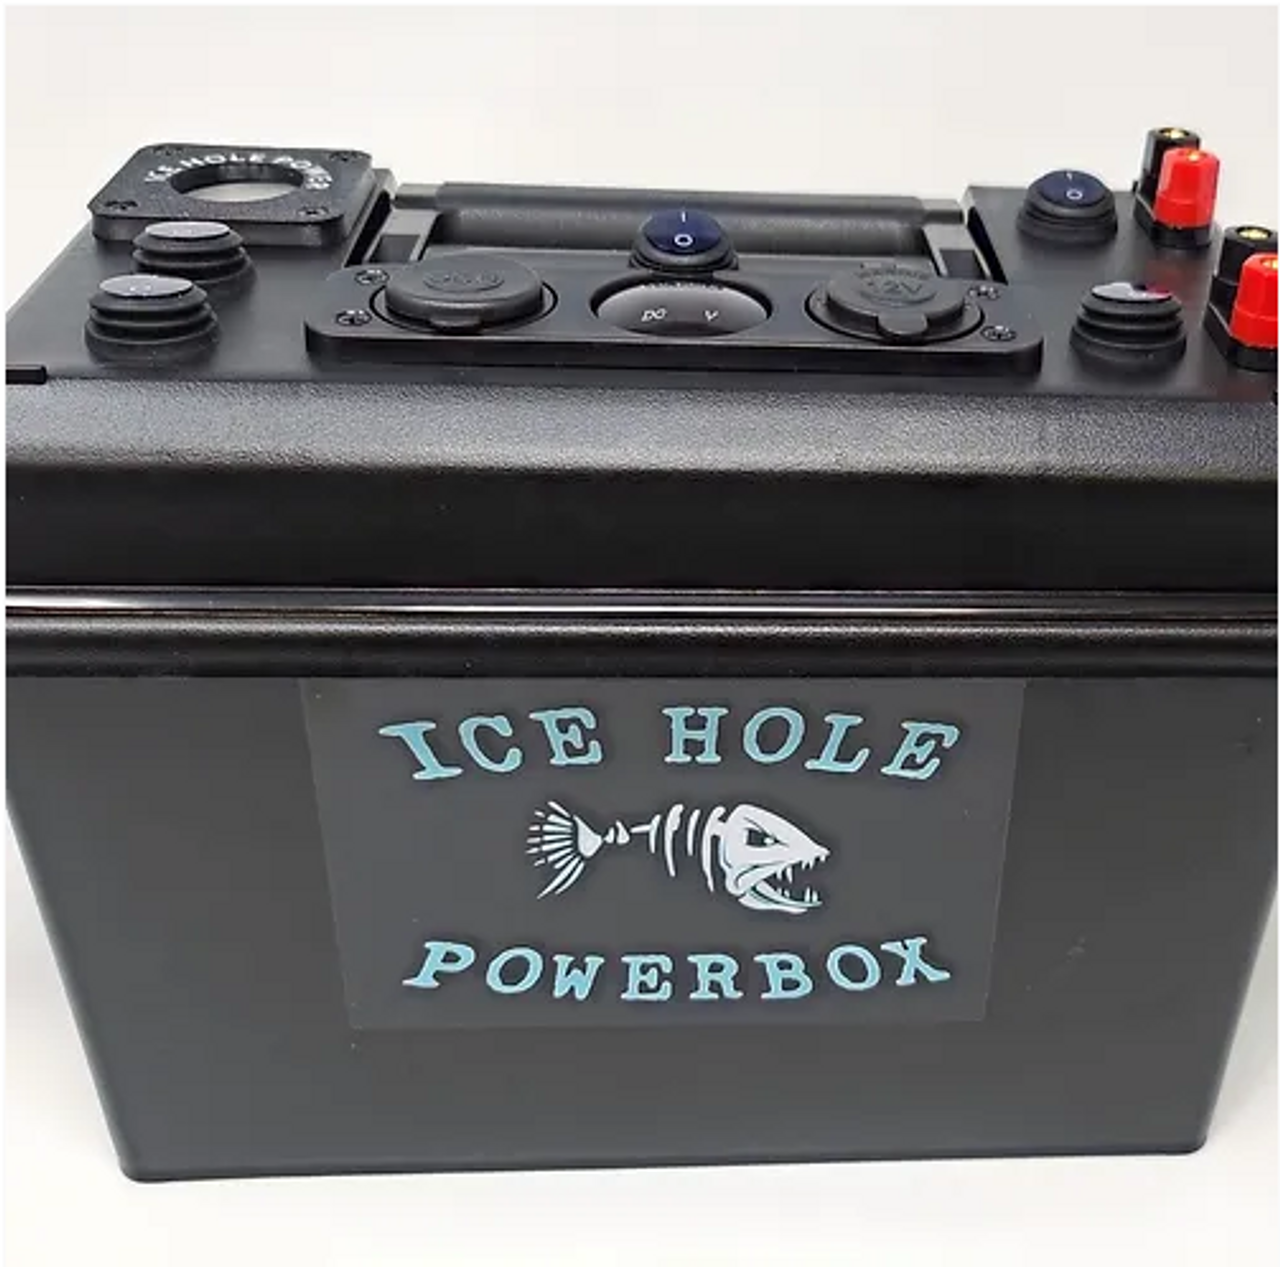 Clancy’s PowerBox 12 Volt Battery Box With Ice Jig Glow Cup.